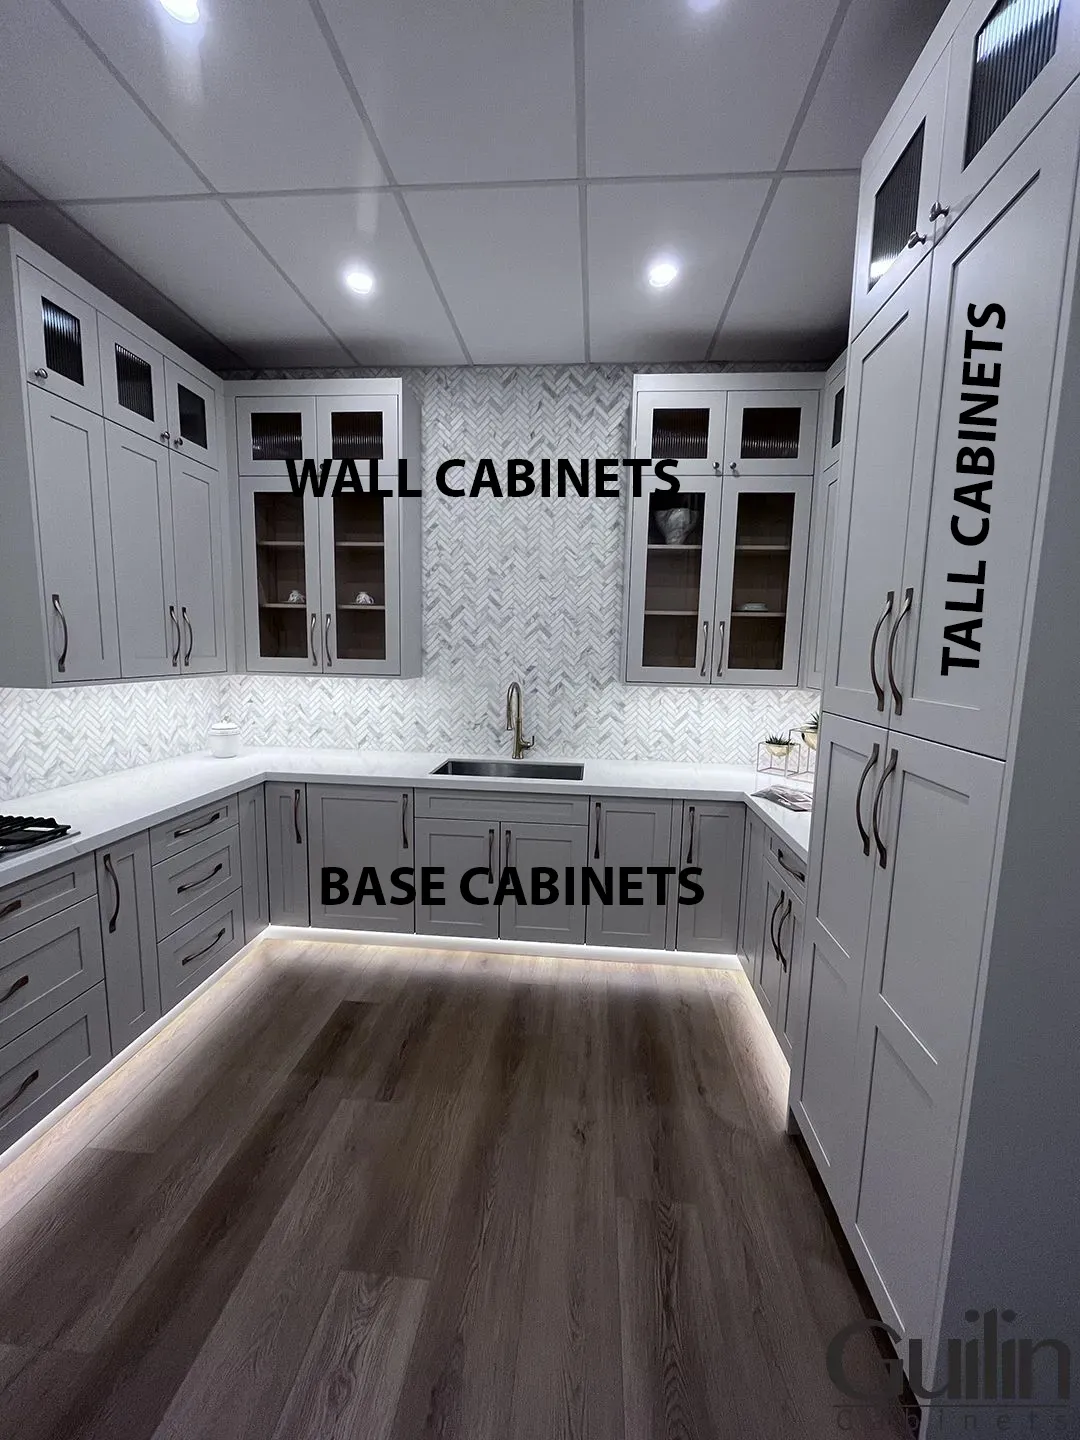 Tal and walll cabinets help you save storage, and free your countertop space.